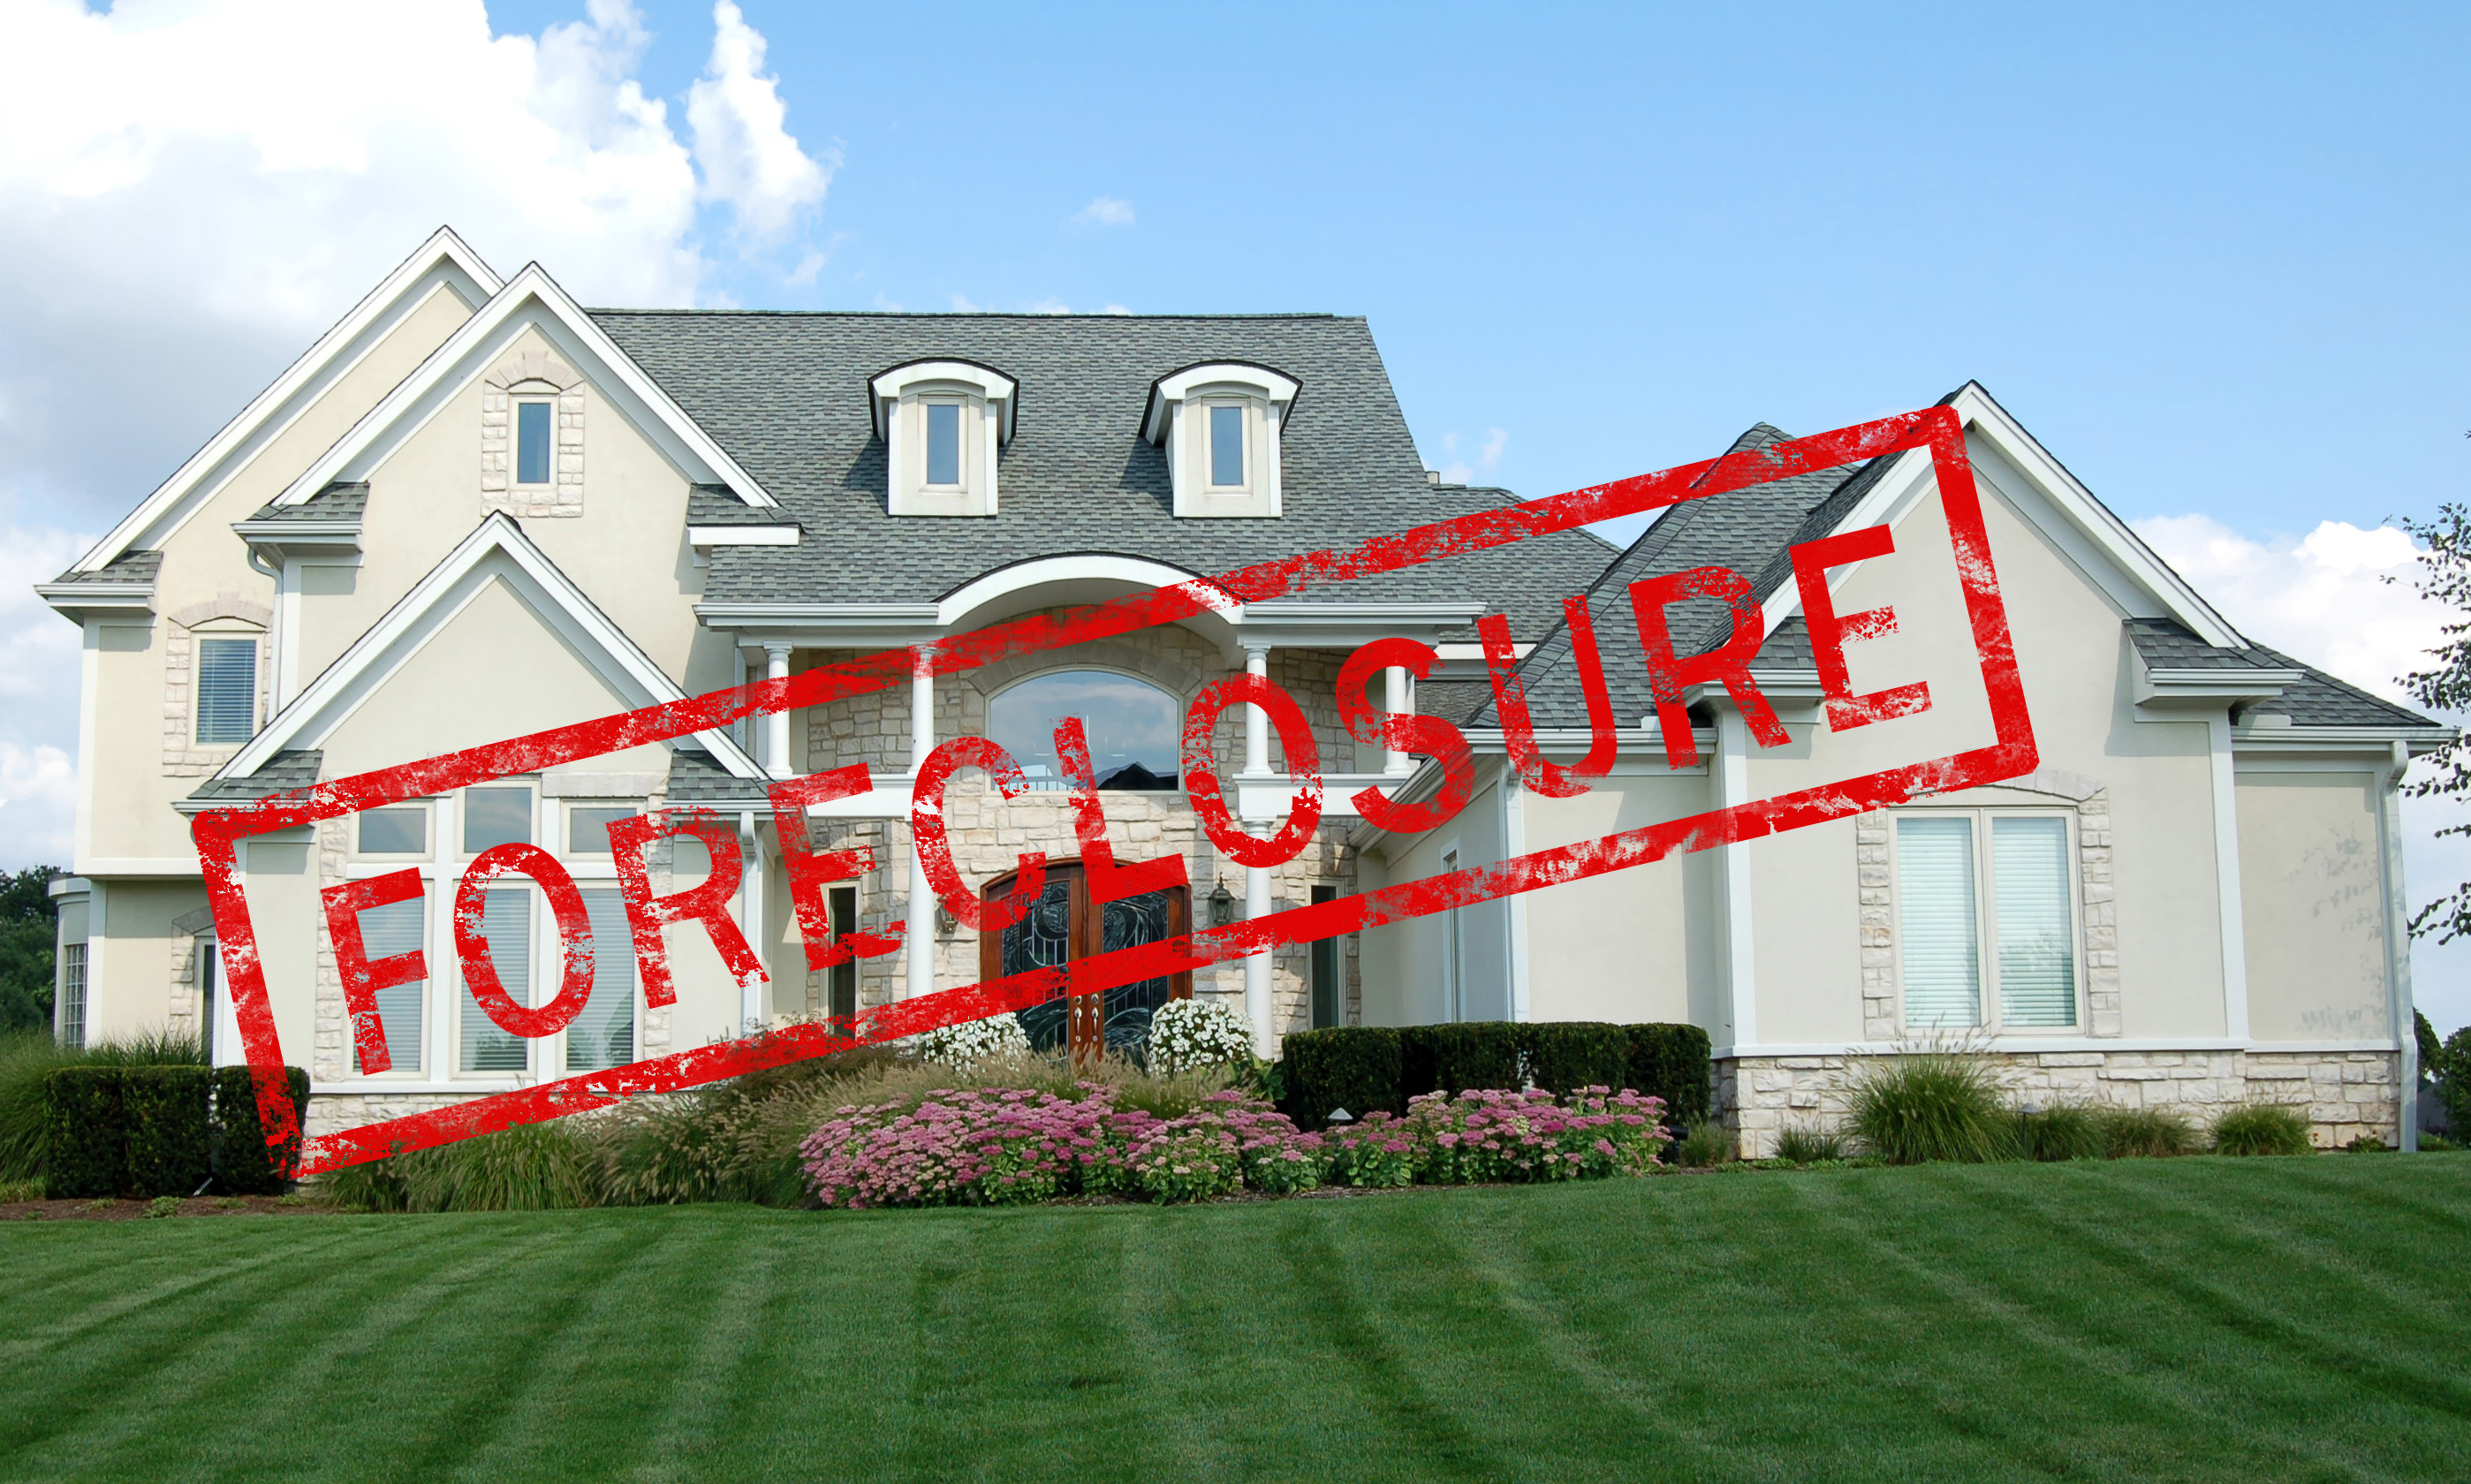 Call James Blanton Appraisals when you need valuations of Craven foreclosures